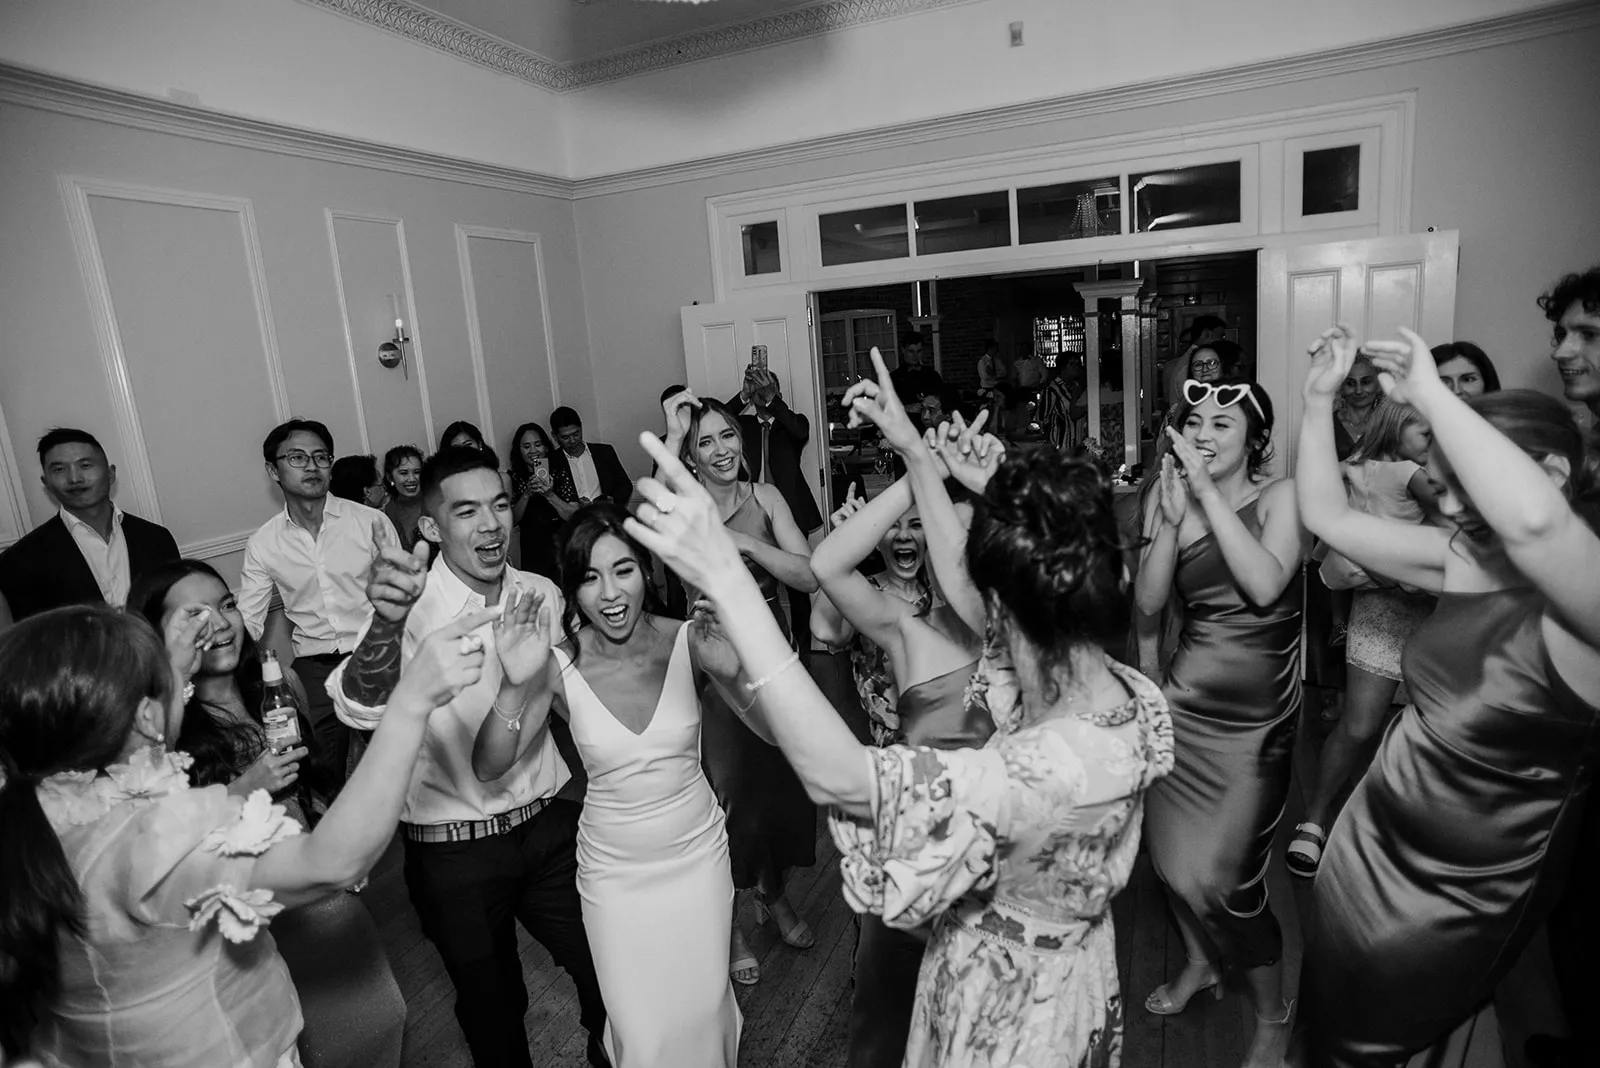 A black and white photo of a wedding reception where a group of people, including the bride and groom, are joyfully dancing together in a circle. The guests are smiling, raising their hands, and embracing the celebratory atmosphere in a decorated room.